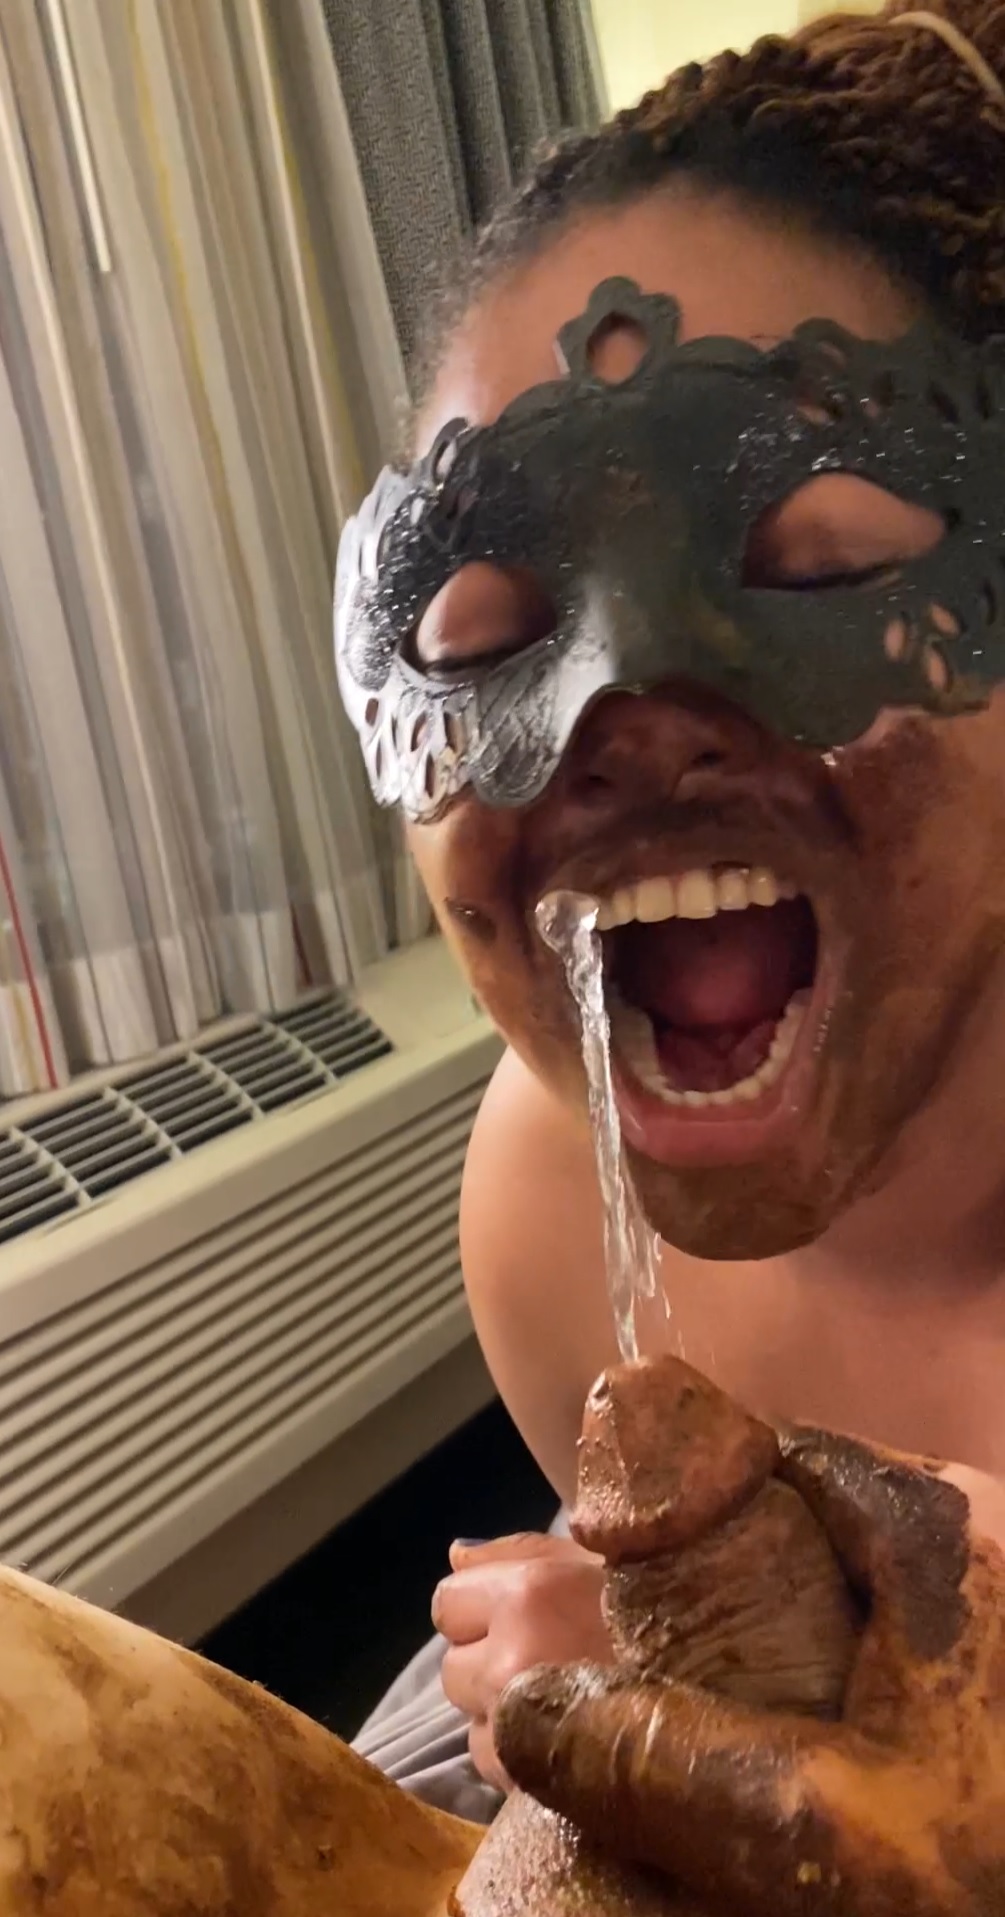 Hungry slave drinks some piss after a scat meal